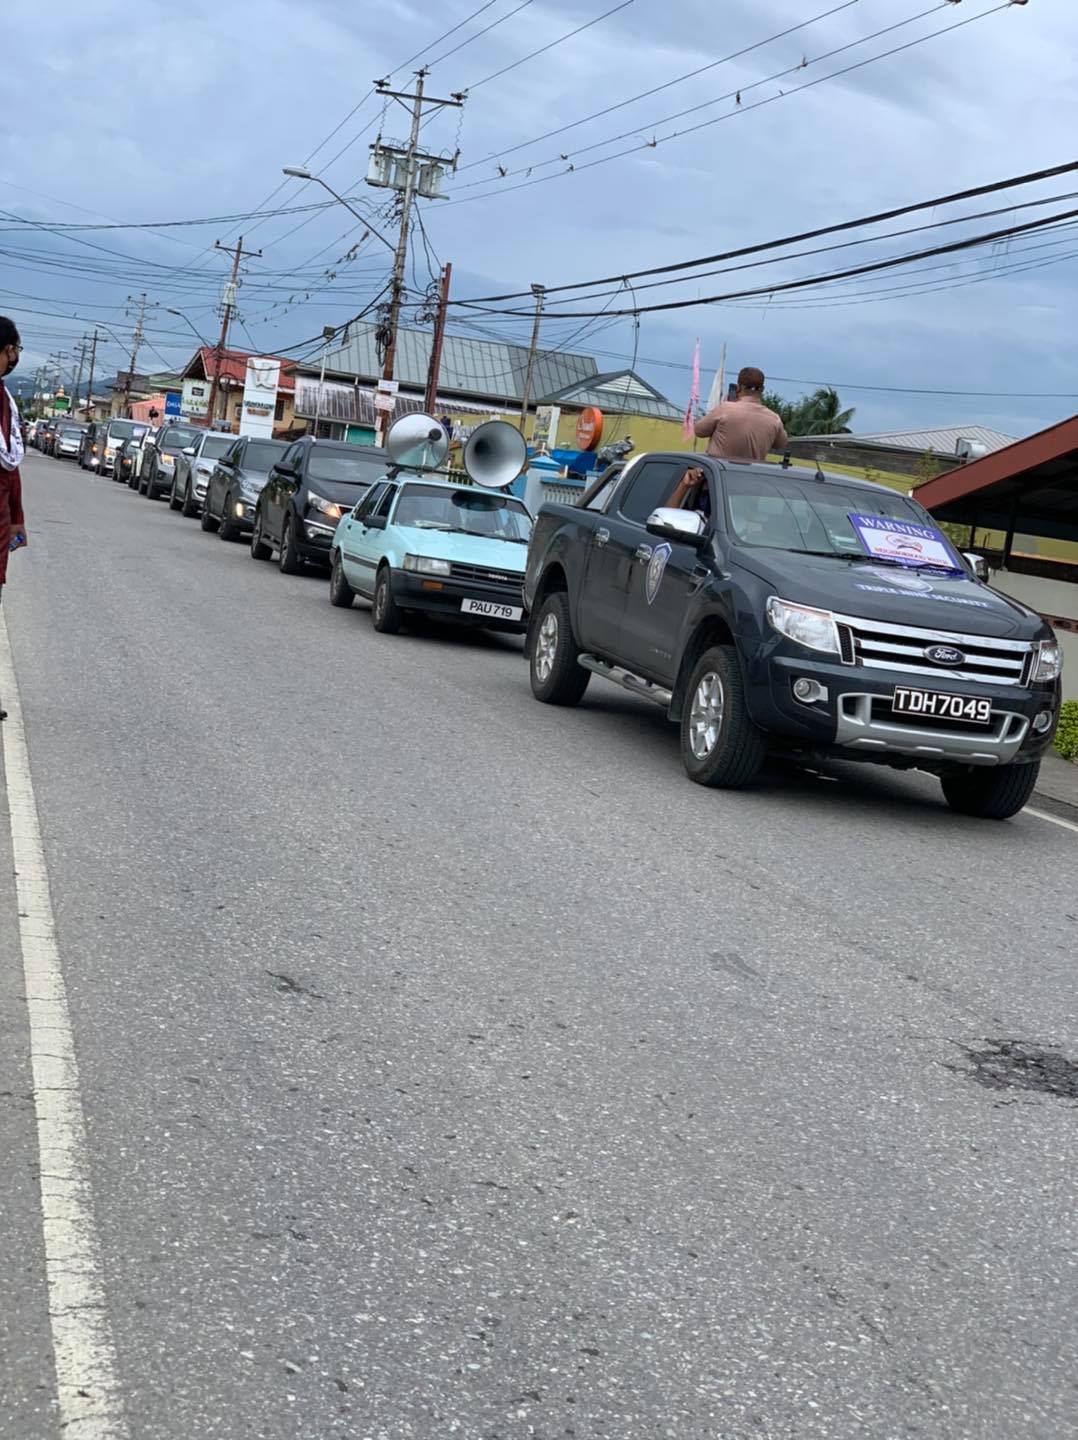 TTPS Grants Scrap Iron Dealers Association Permission To Hold Motorcade On November 6th